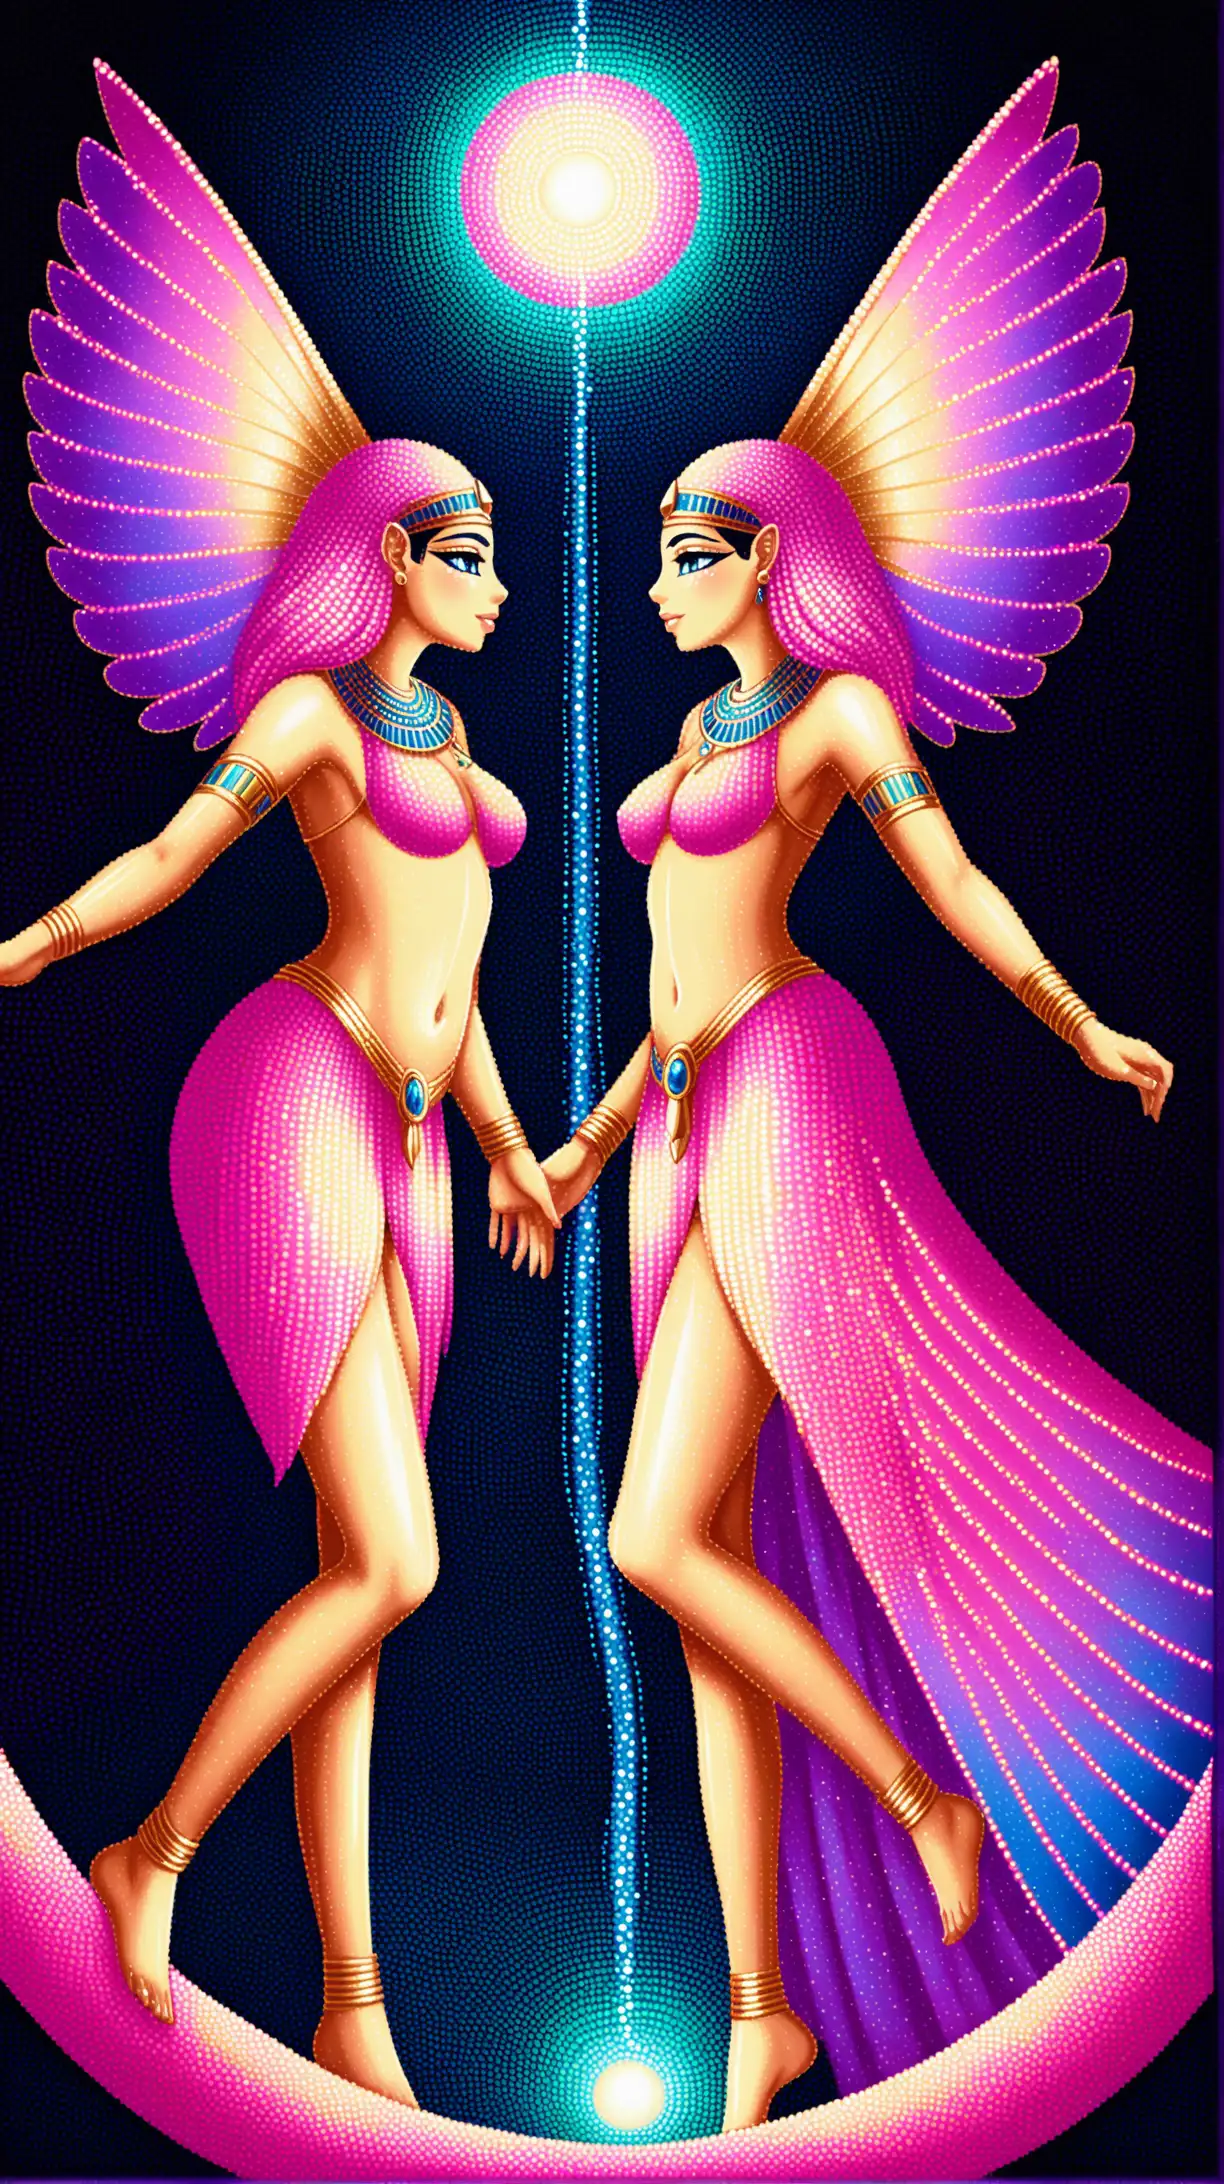 Egyptian nymphs, magical atmosphere, pointillism, pink and blue, black background, shiny, opposite, helix, youthful, dreams